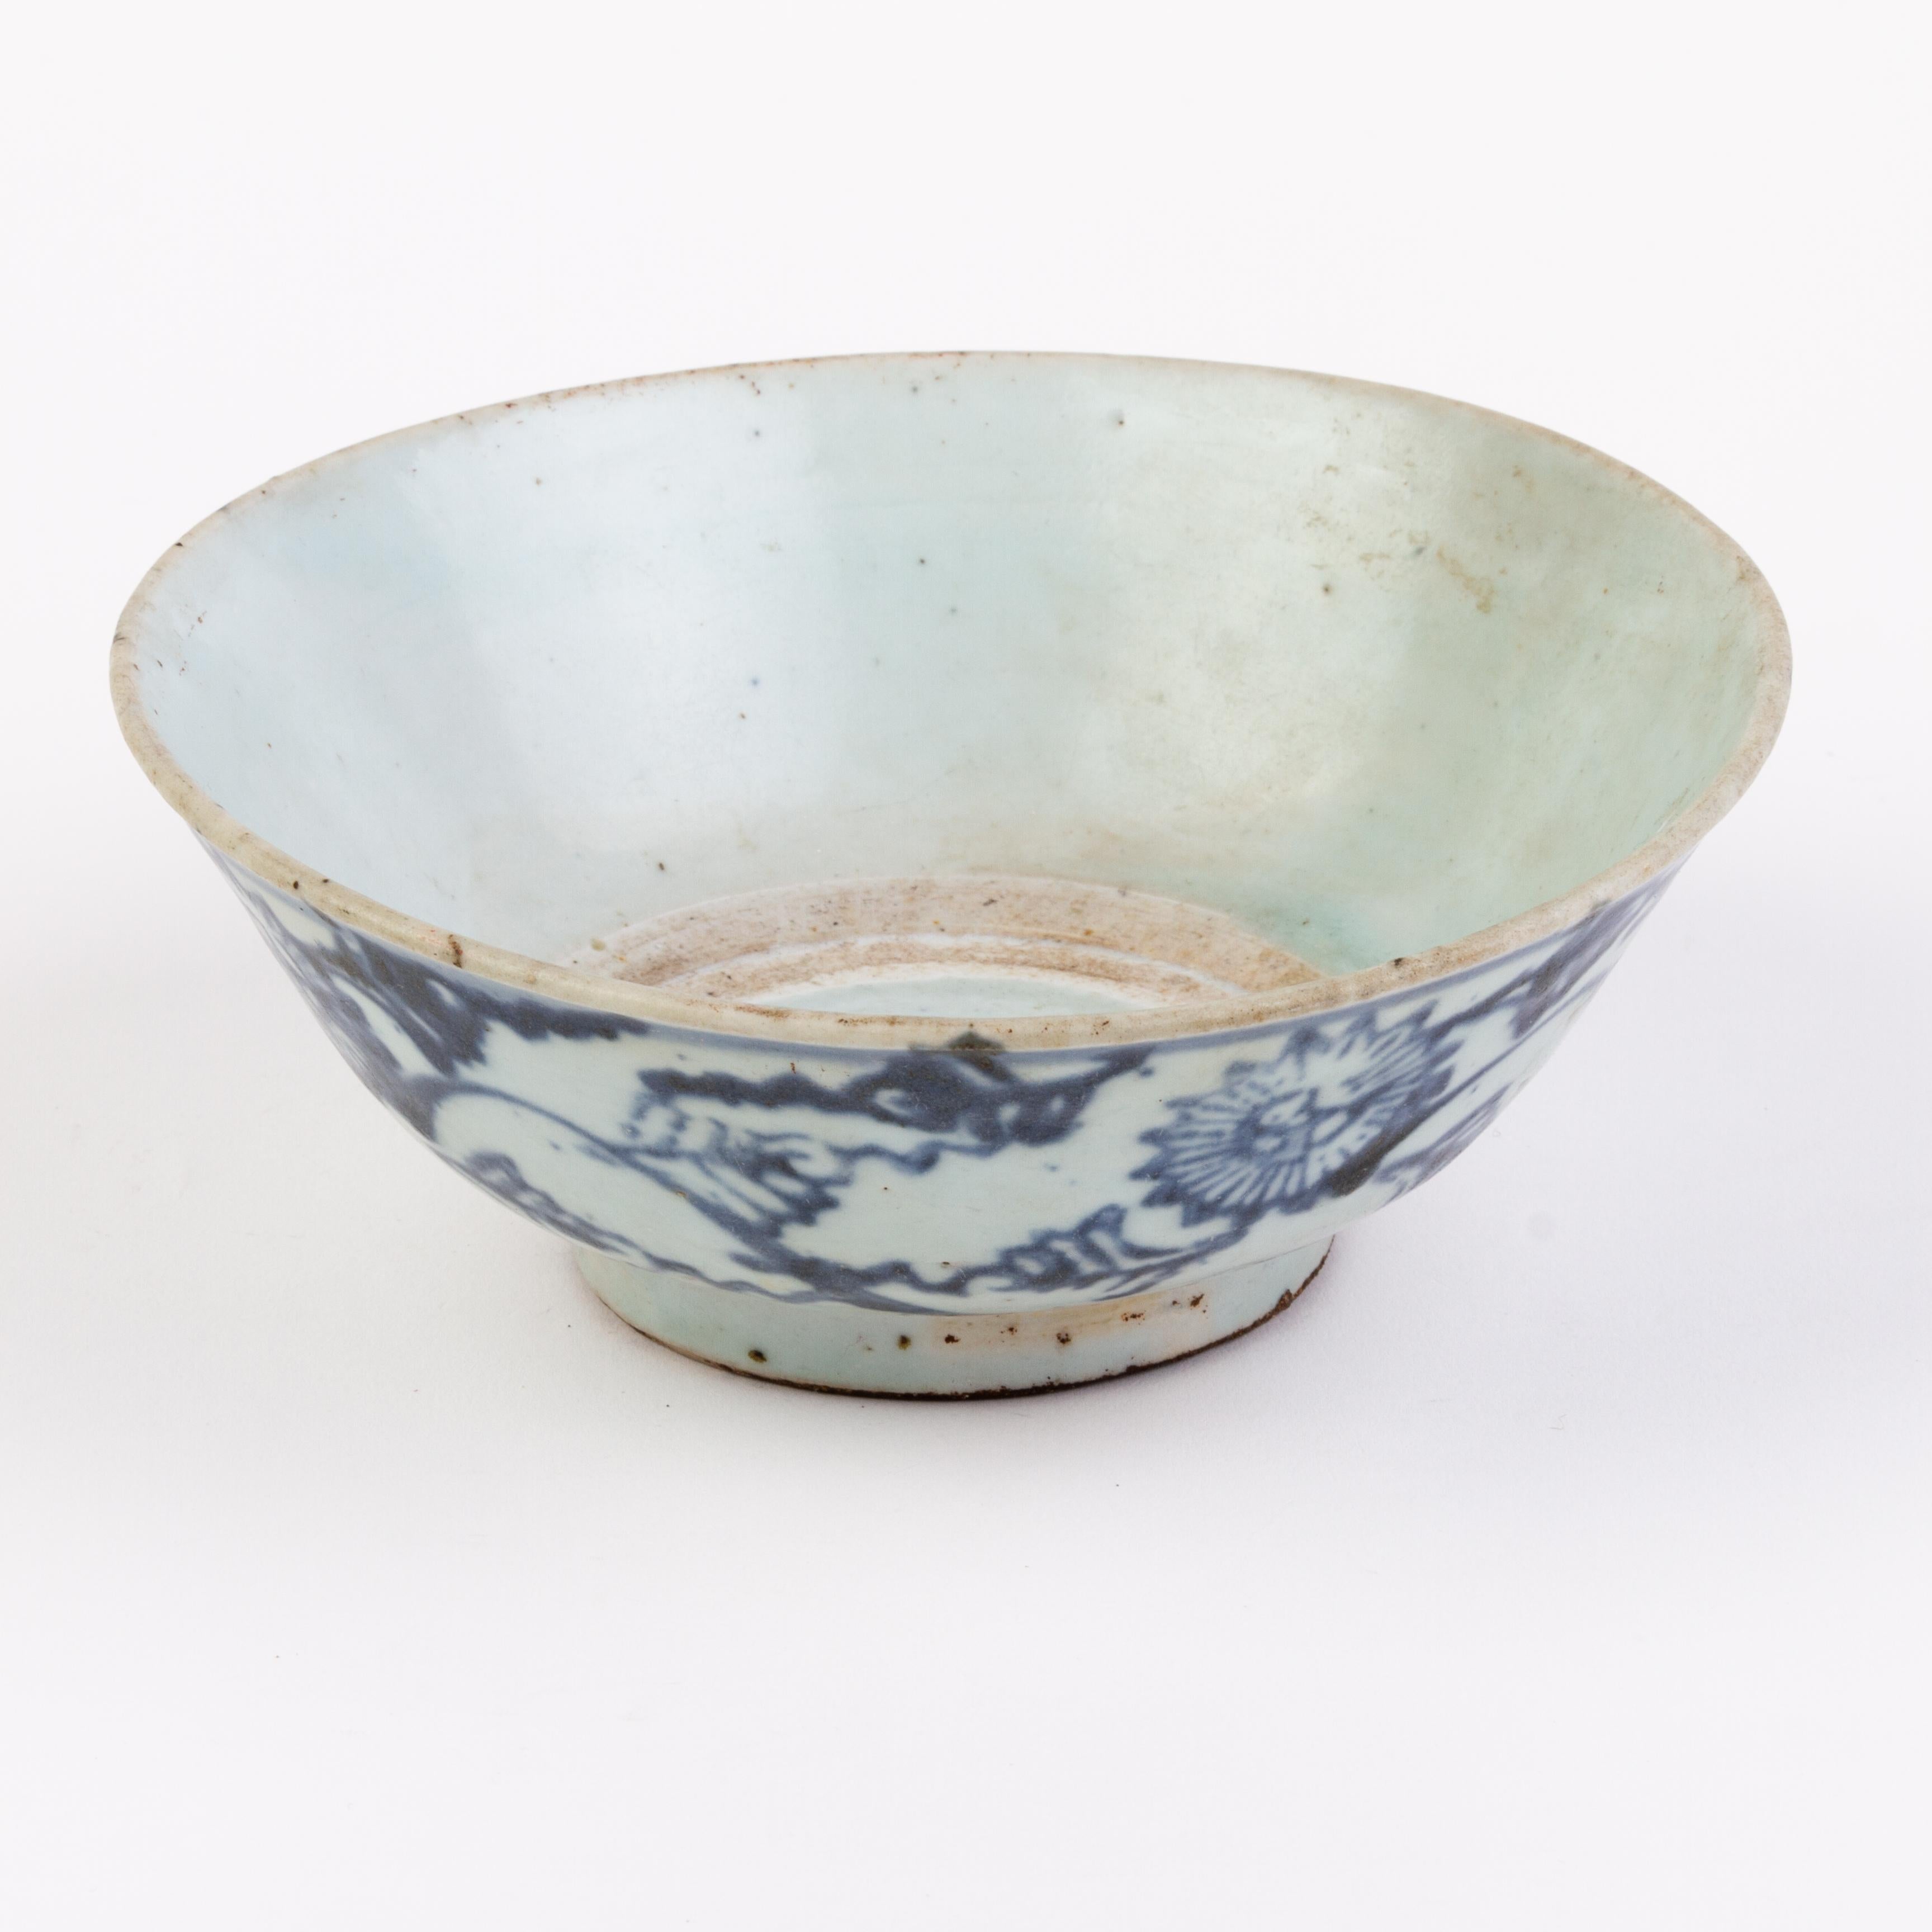 Chinese Ming Dynasty Blue & White Porcelain Floral Bowl 18th Century 
Good condition overall, as seen
From a private collection
Free international shipping.